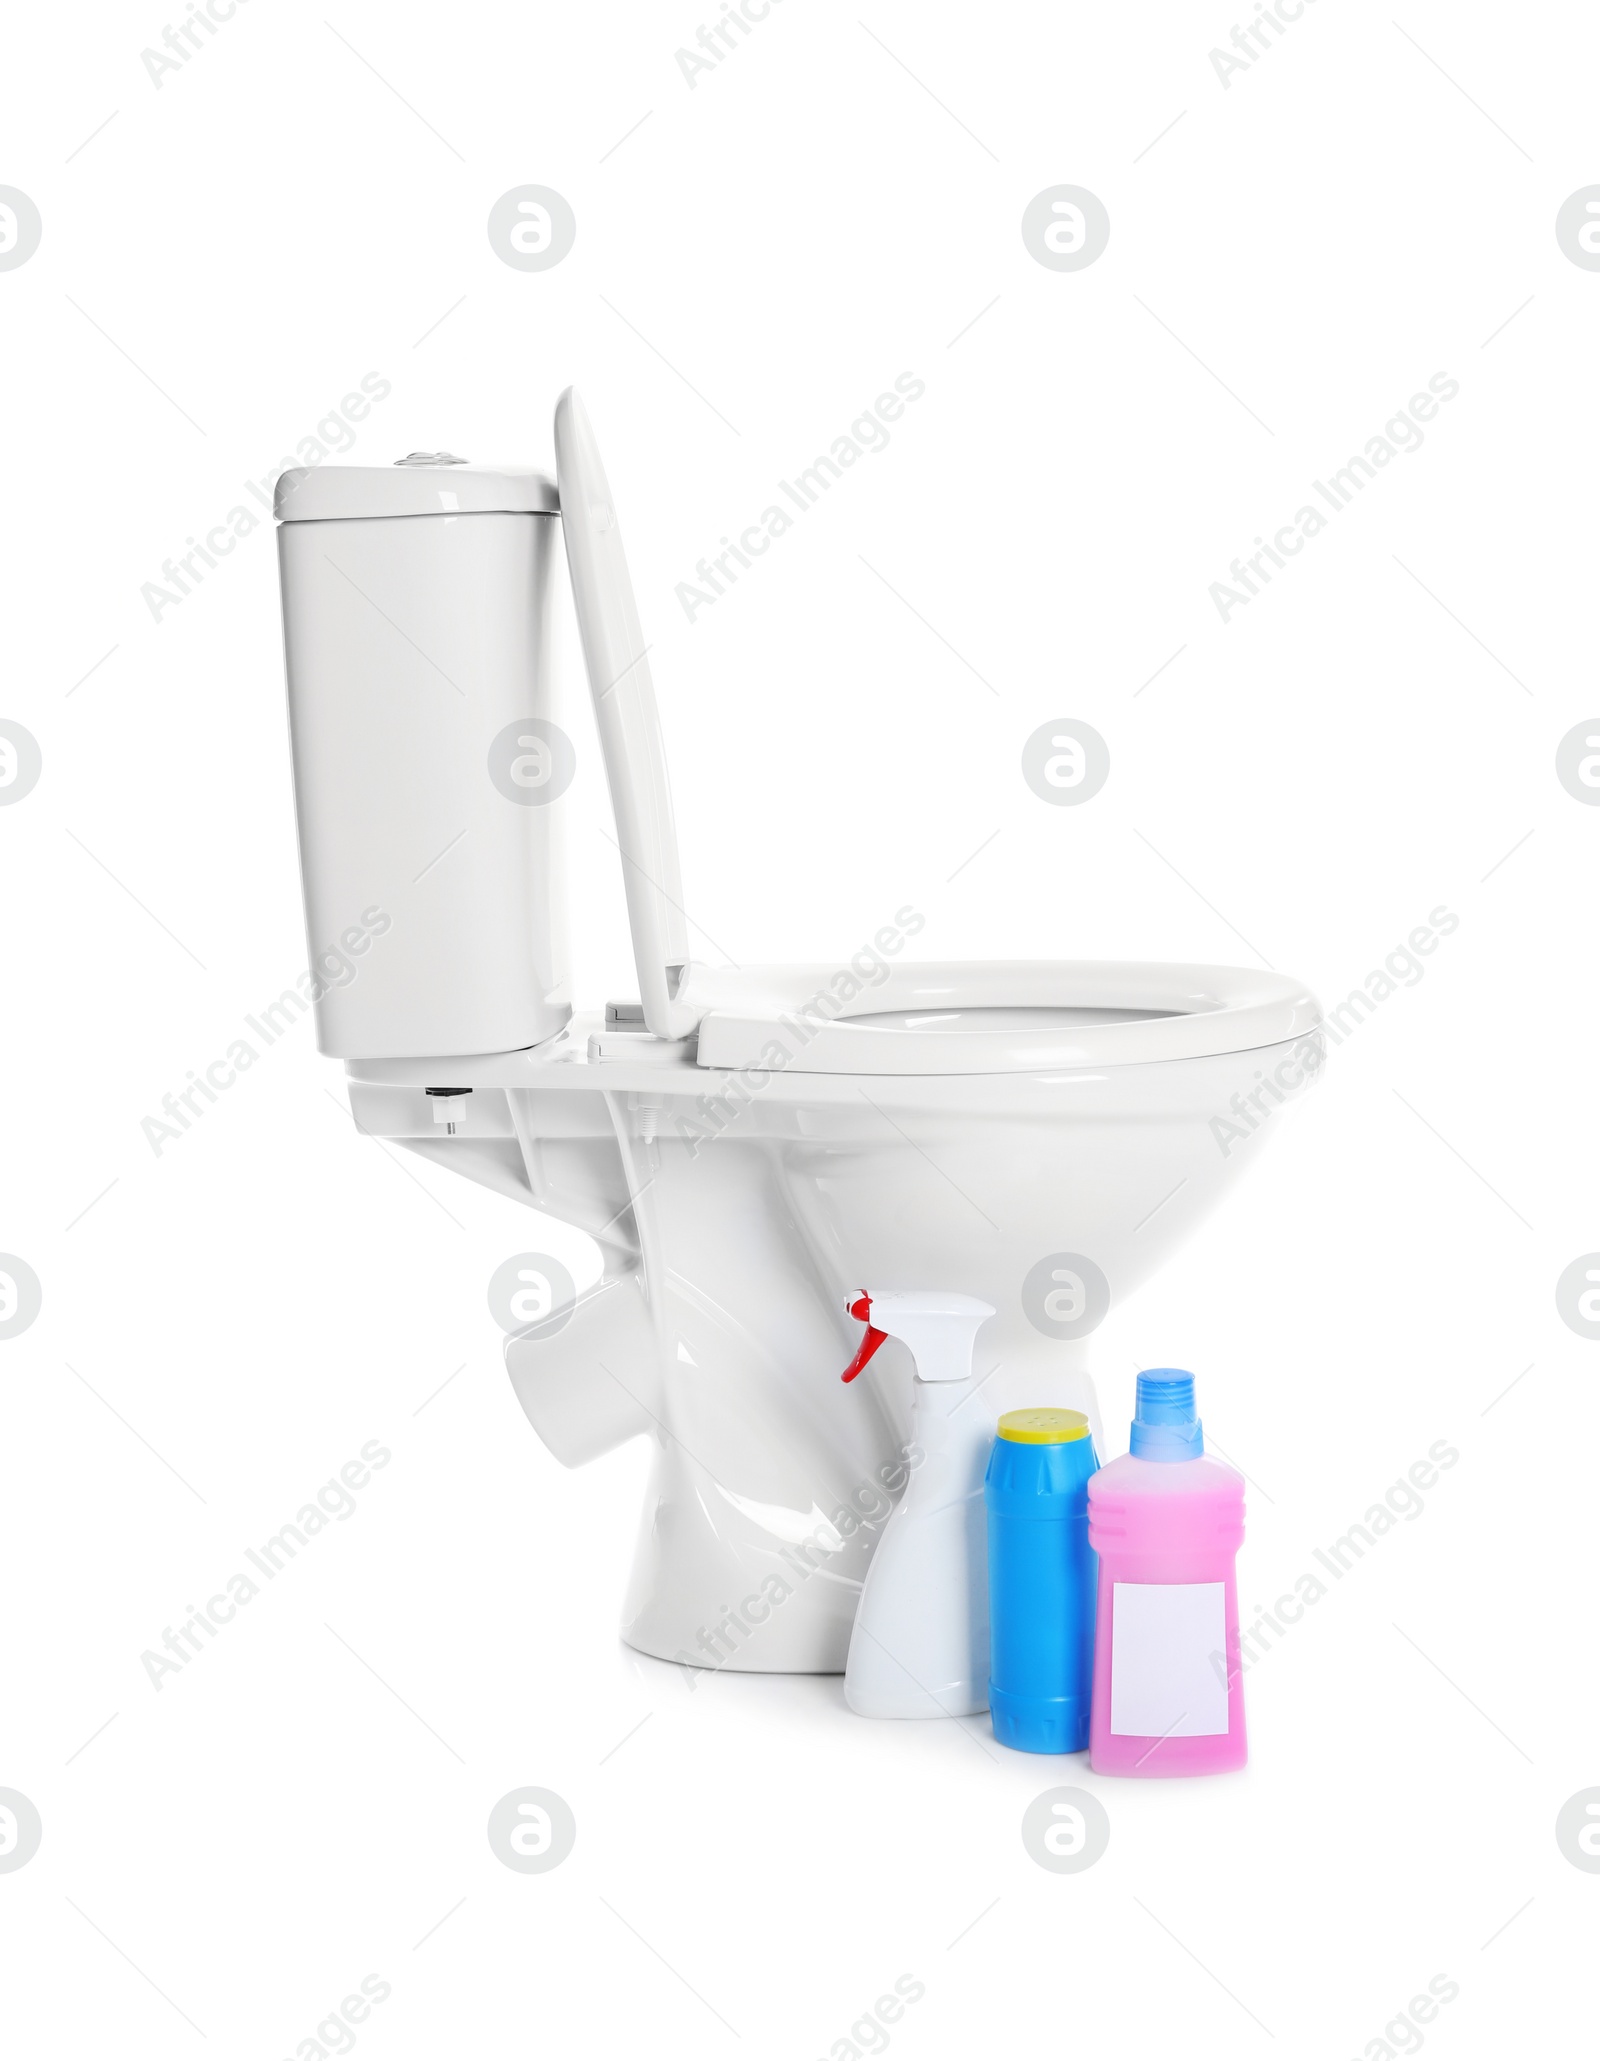 Photo of New ceramic toilet bowl and bottles of detergent on white background